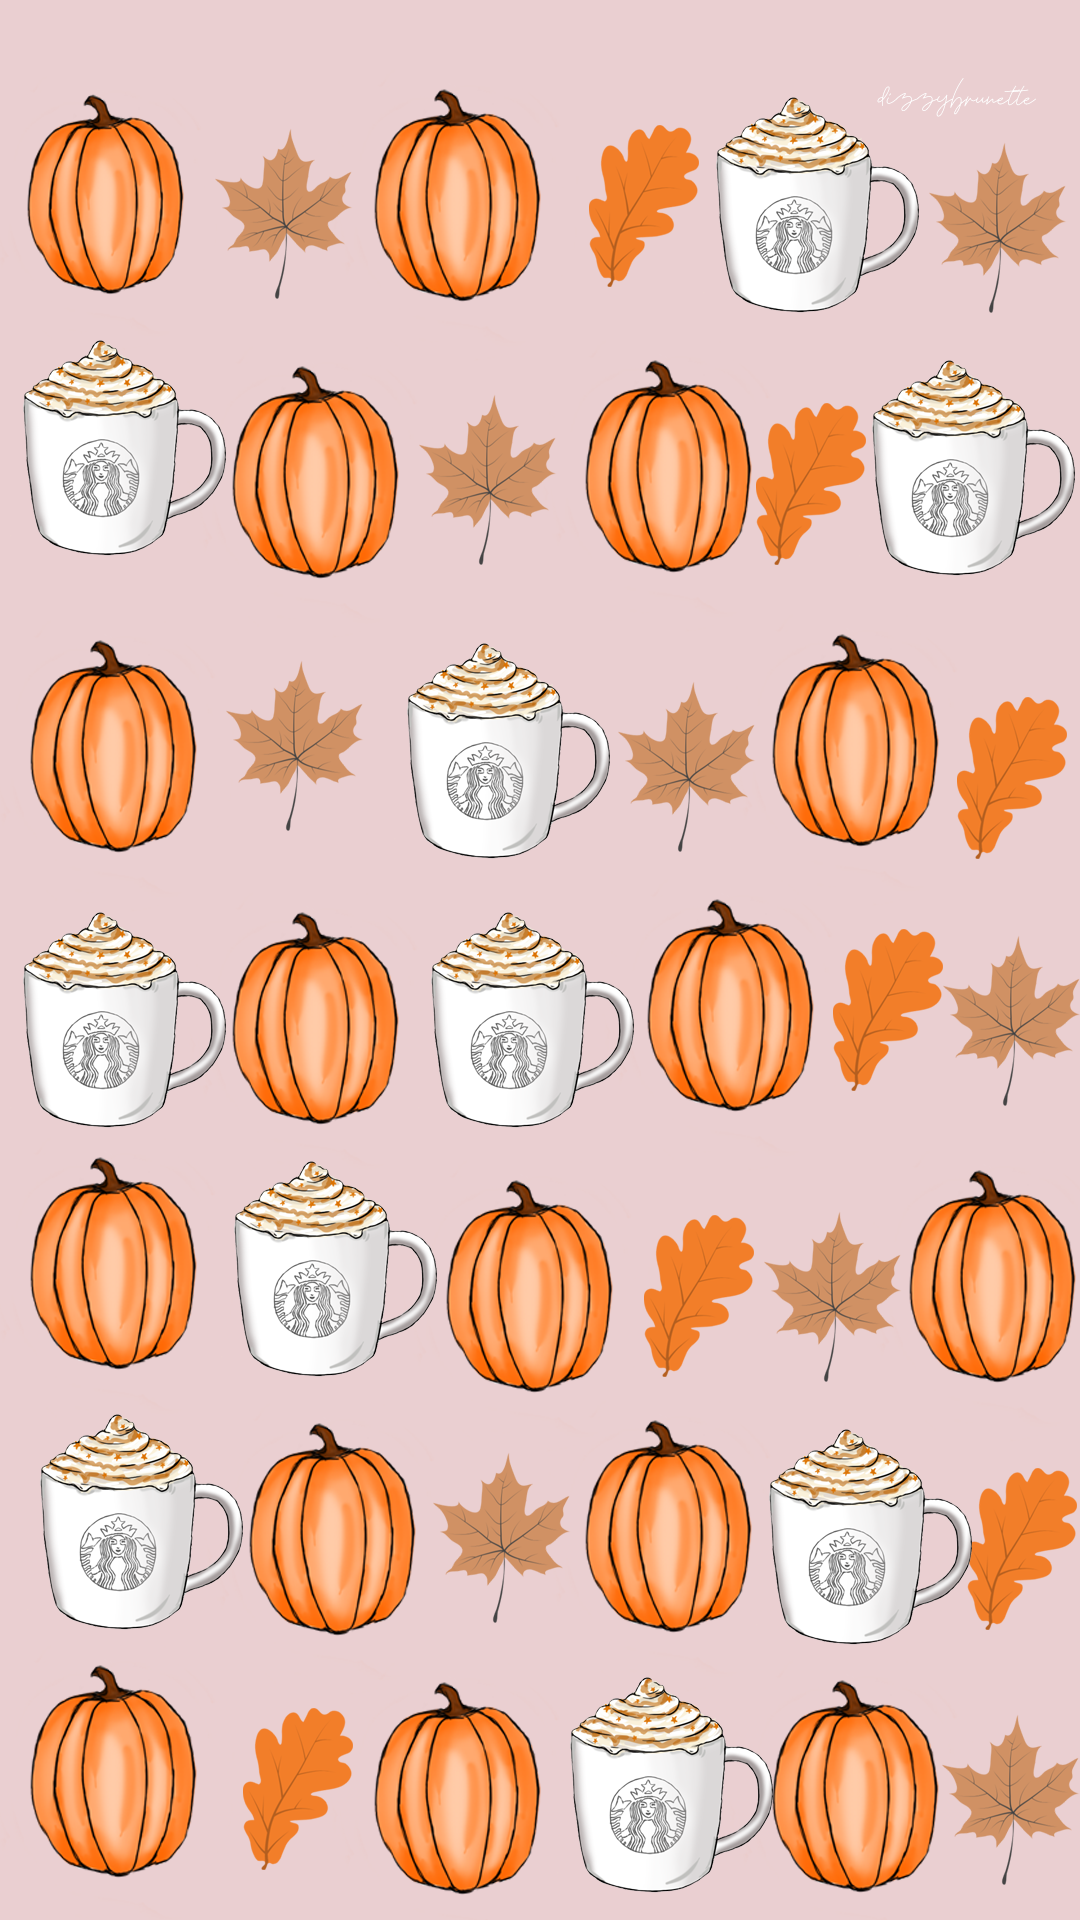 40+ Free Amazing Fall Wallpaper Backgrounds For iPhone -   15 thanksgiving wallpaper iphone ideas